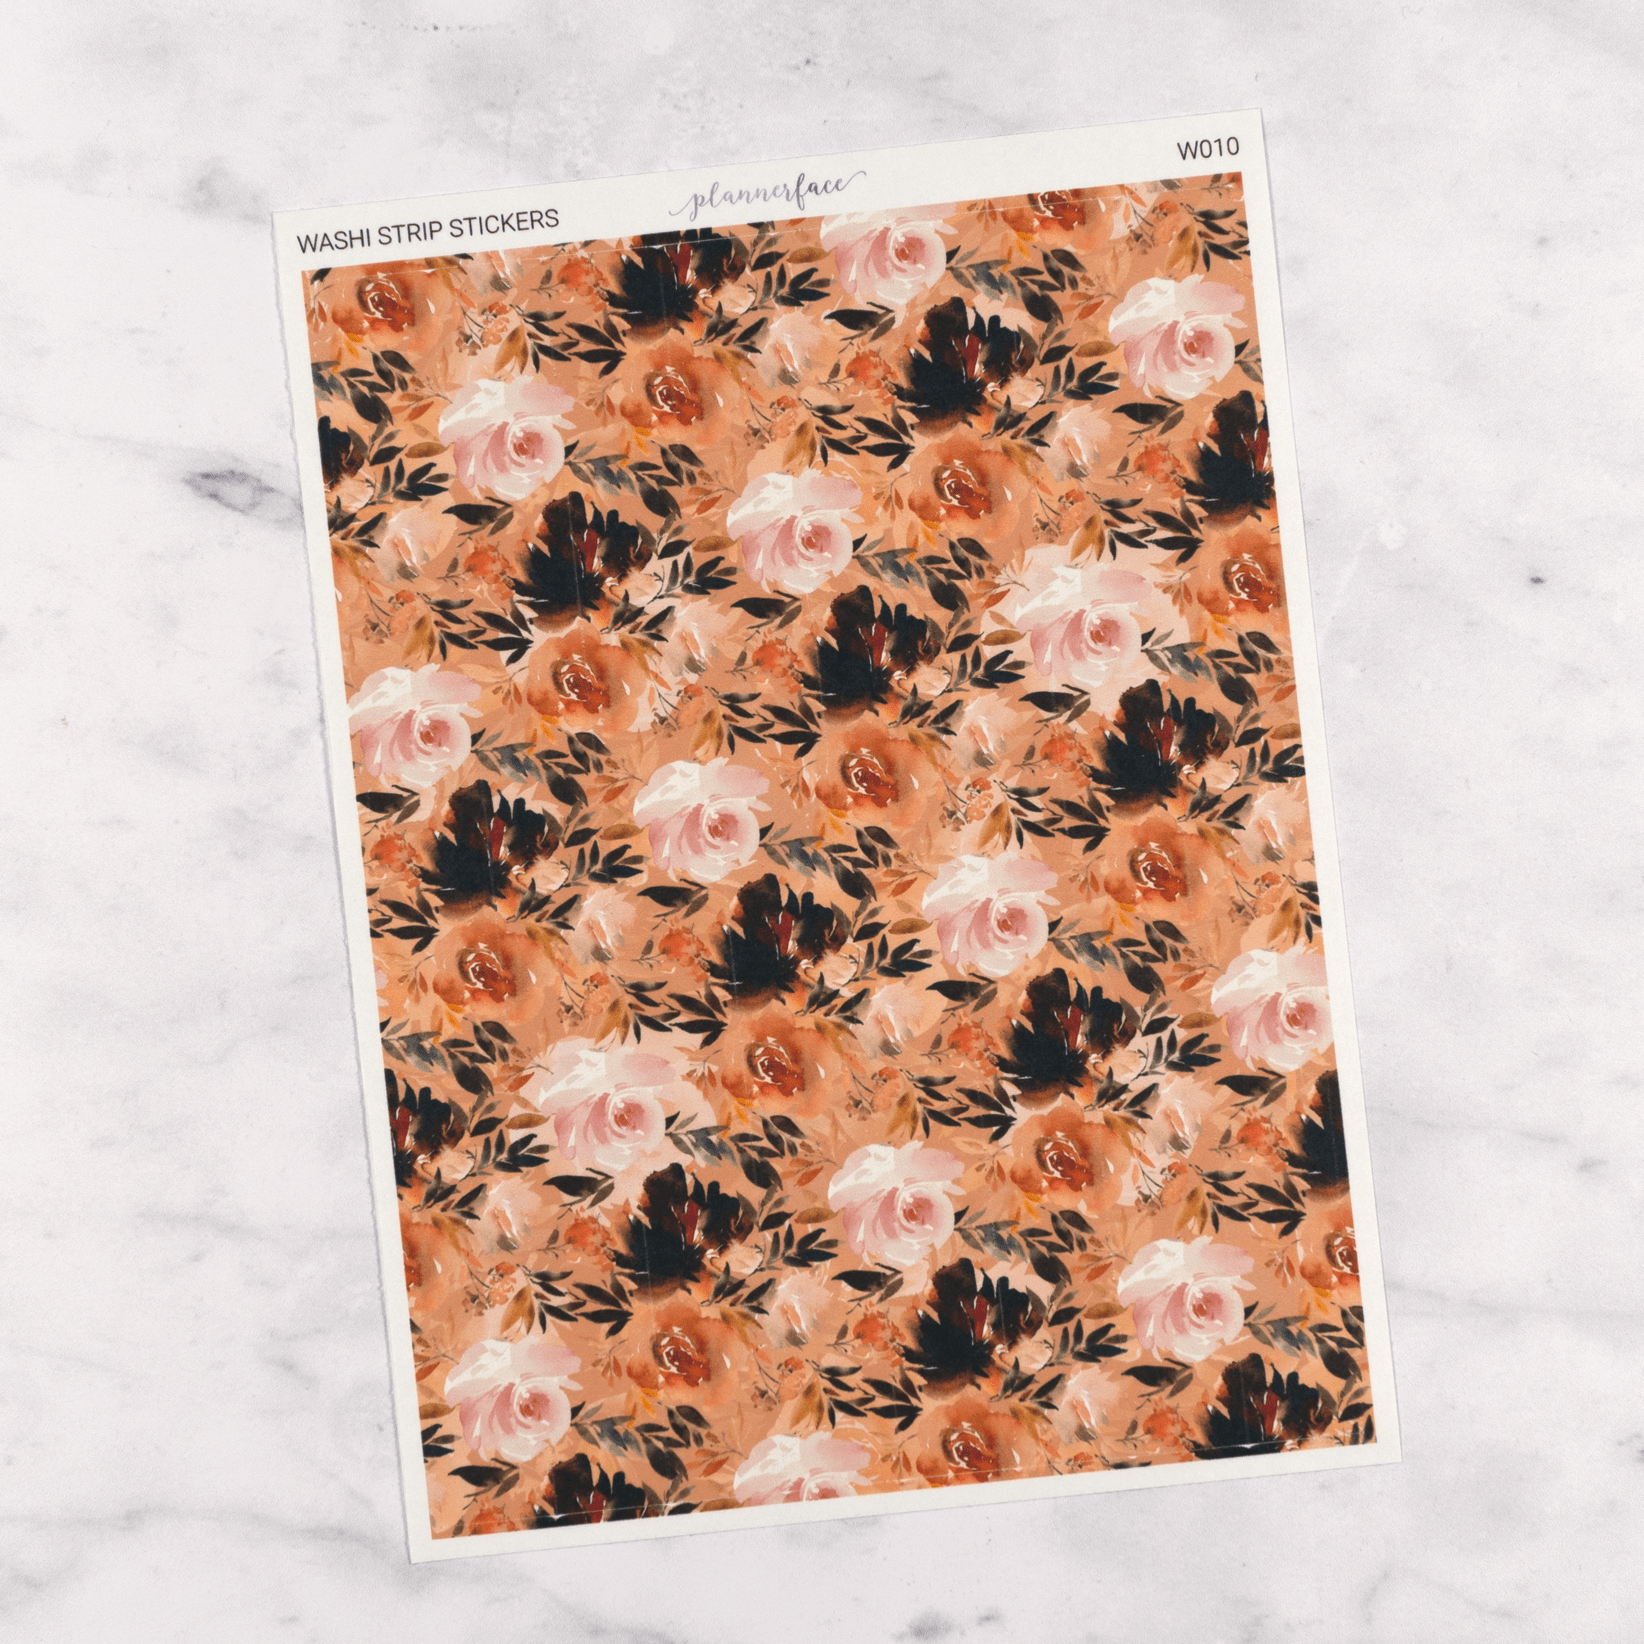 Orange & Brown Floral | Washi Tape Strips by Plannerface